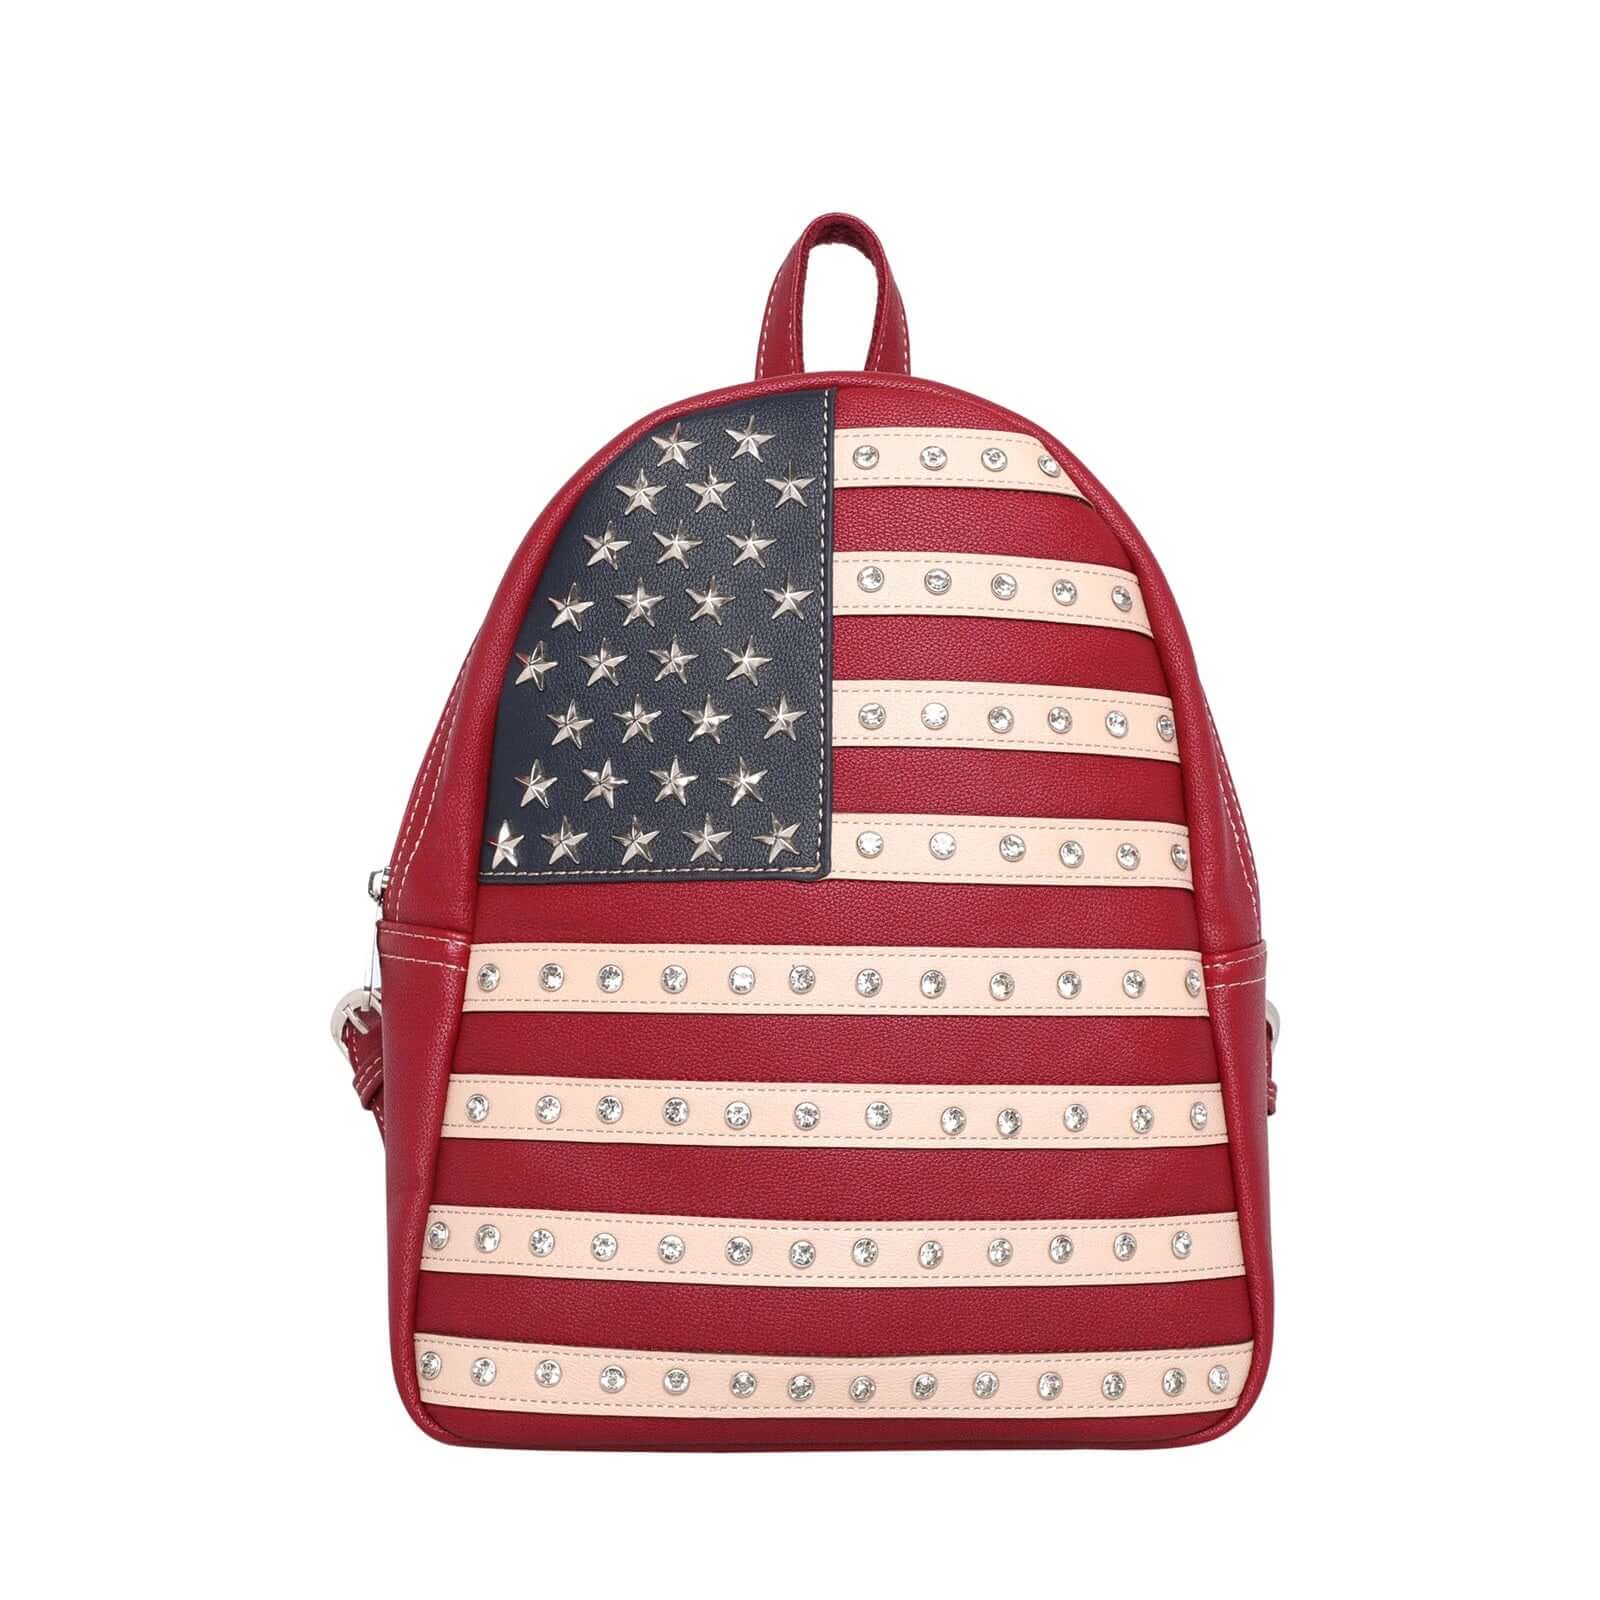 Montana West American Pride Concealed Carry Backpack US Flag Bag Red-US04G-9110-1600-RD